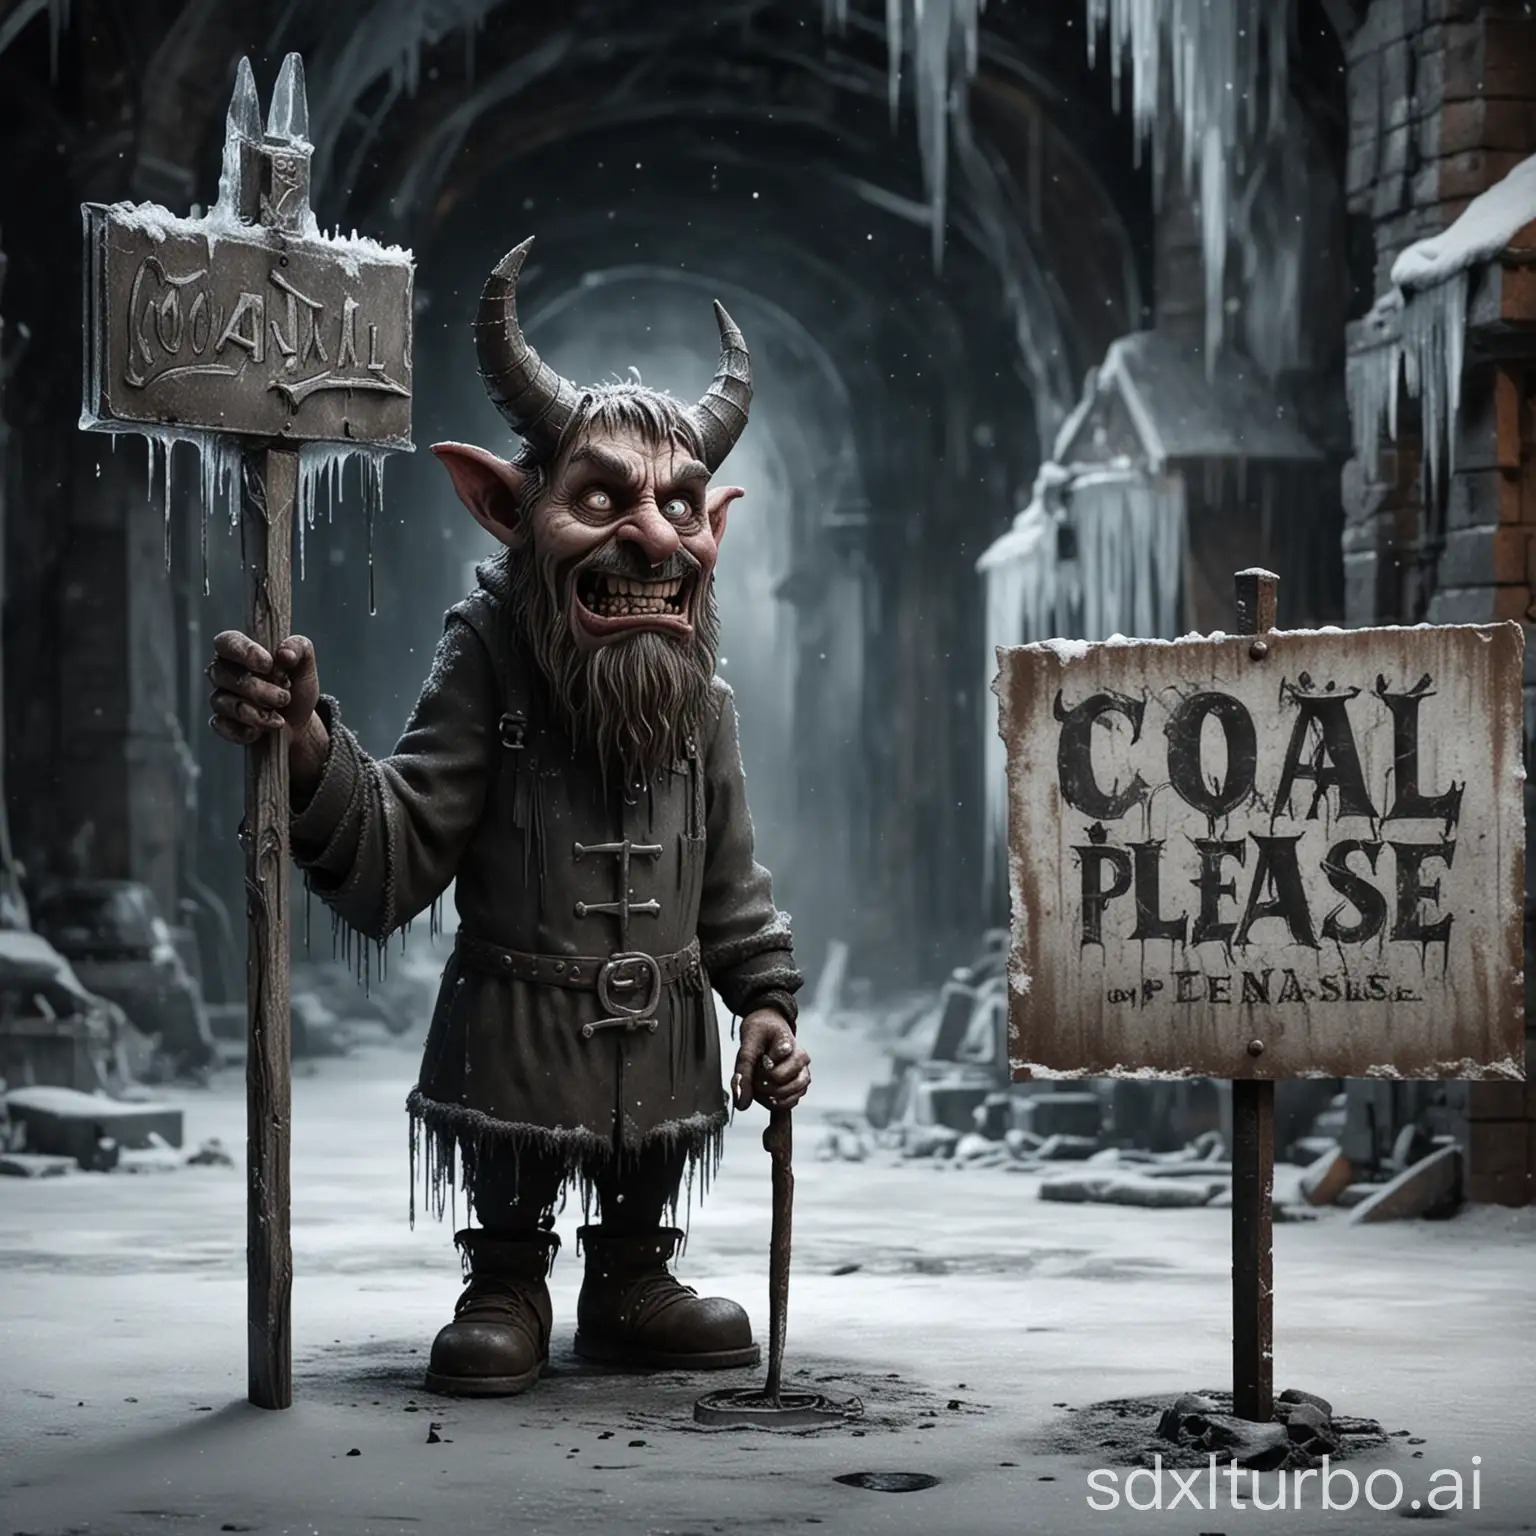 Sad-Devil-Begging-for-Coal-in-Frozen-Dungeon-with-Branding-Iron